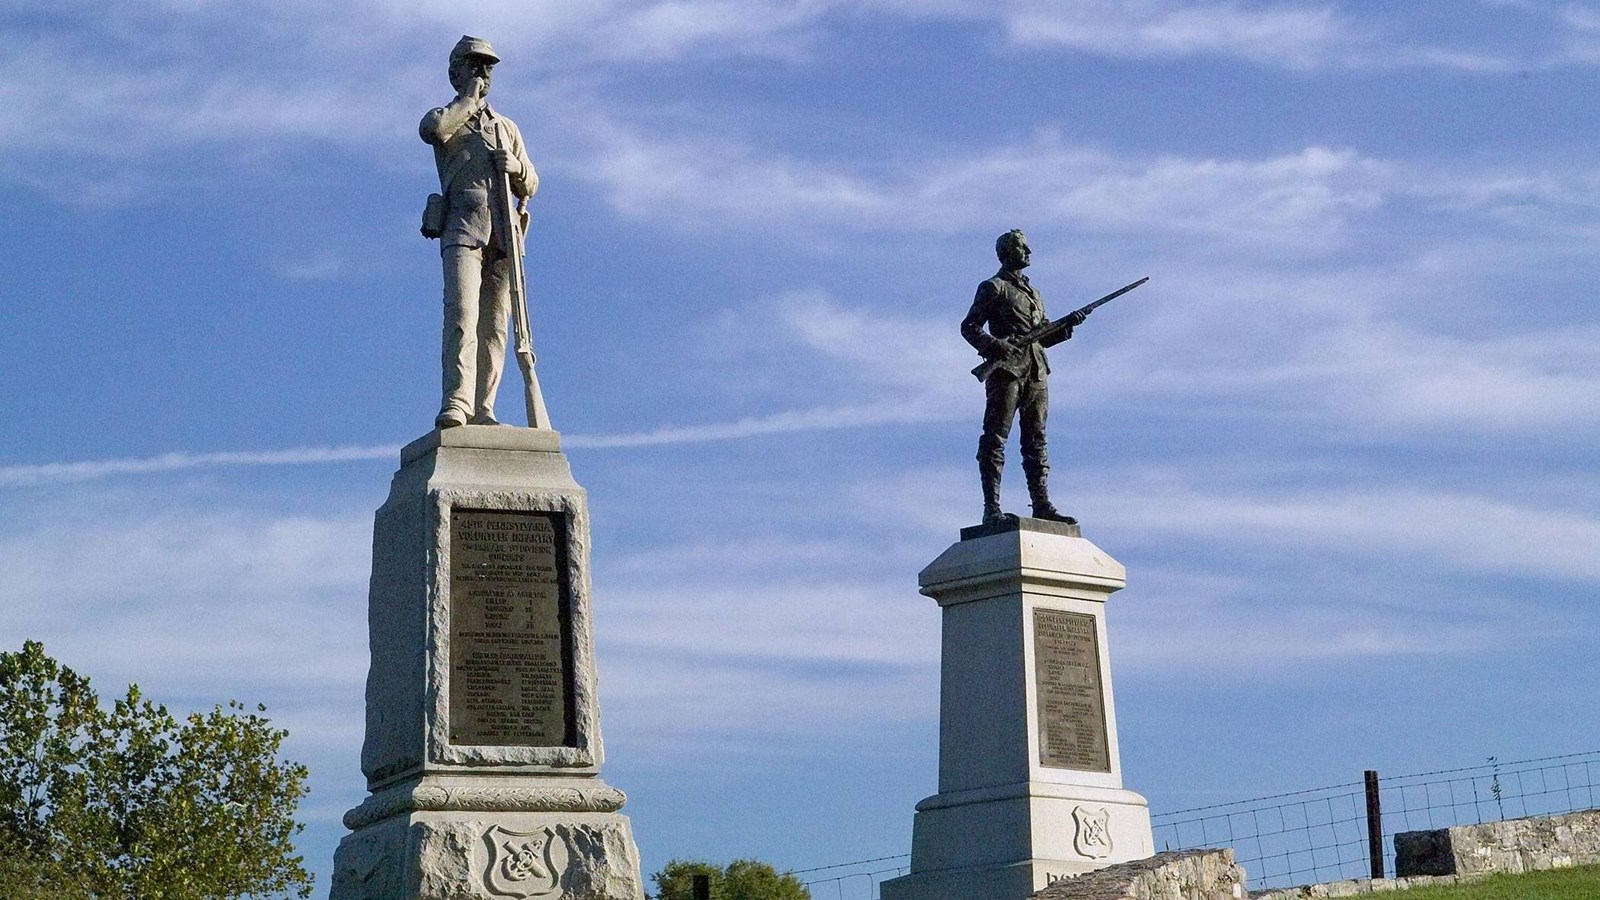 The 45th and 100th Pennsylvania Infantry monuments, both are stone columns with soldiers at the top.